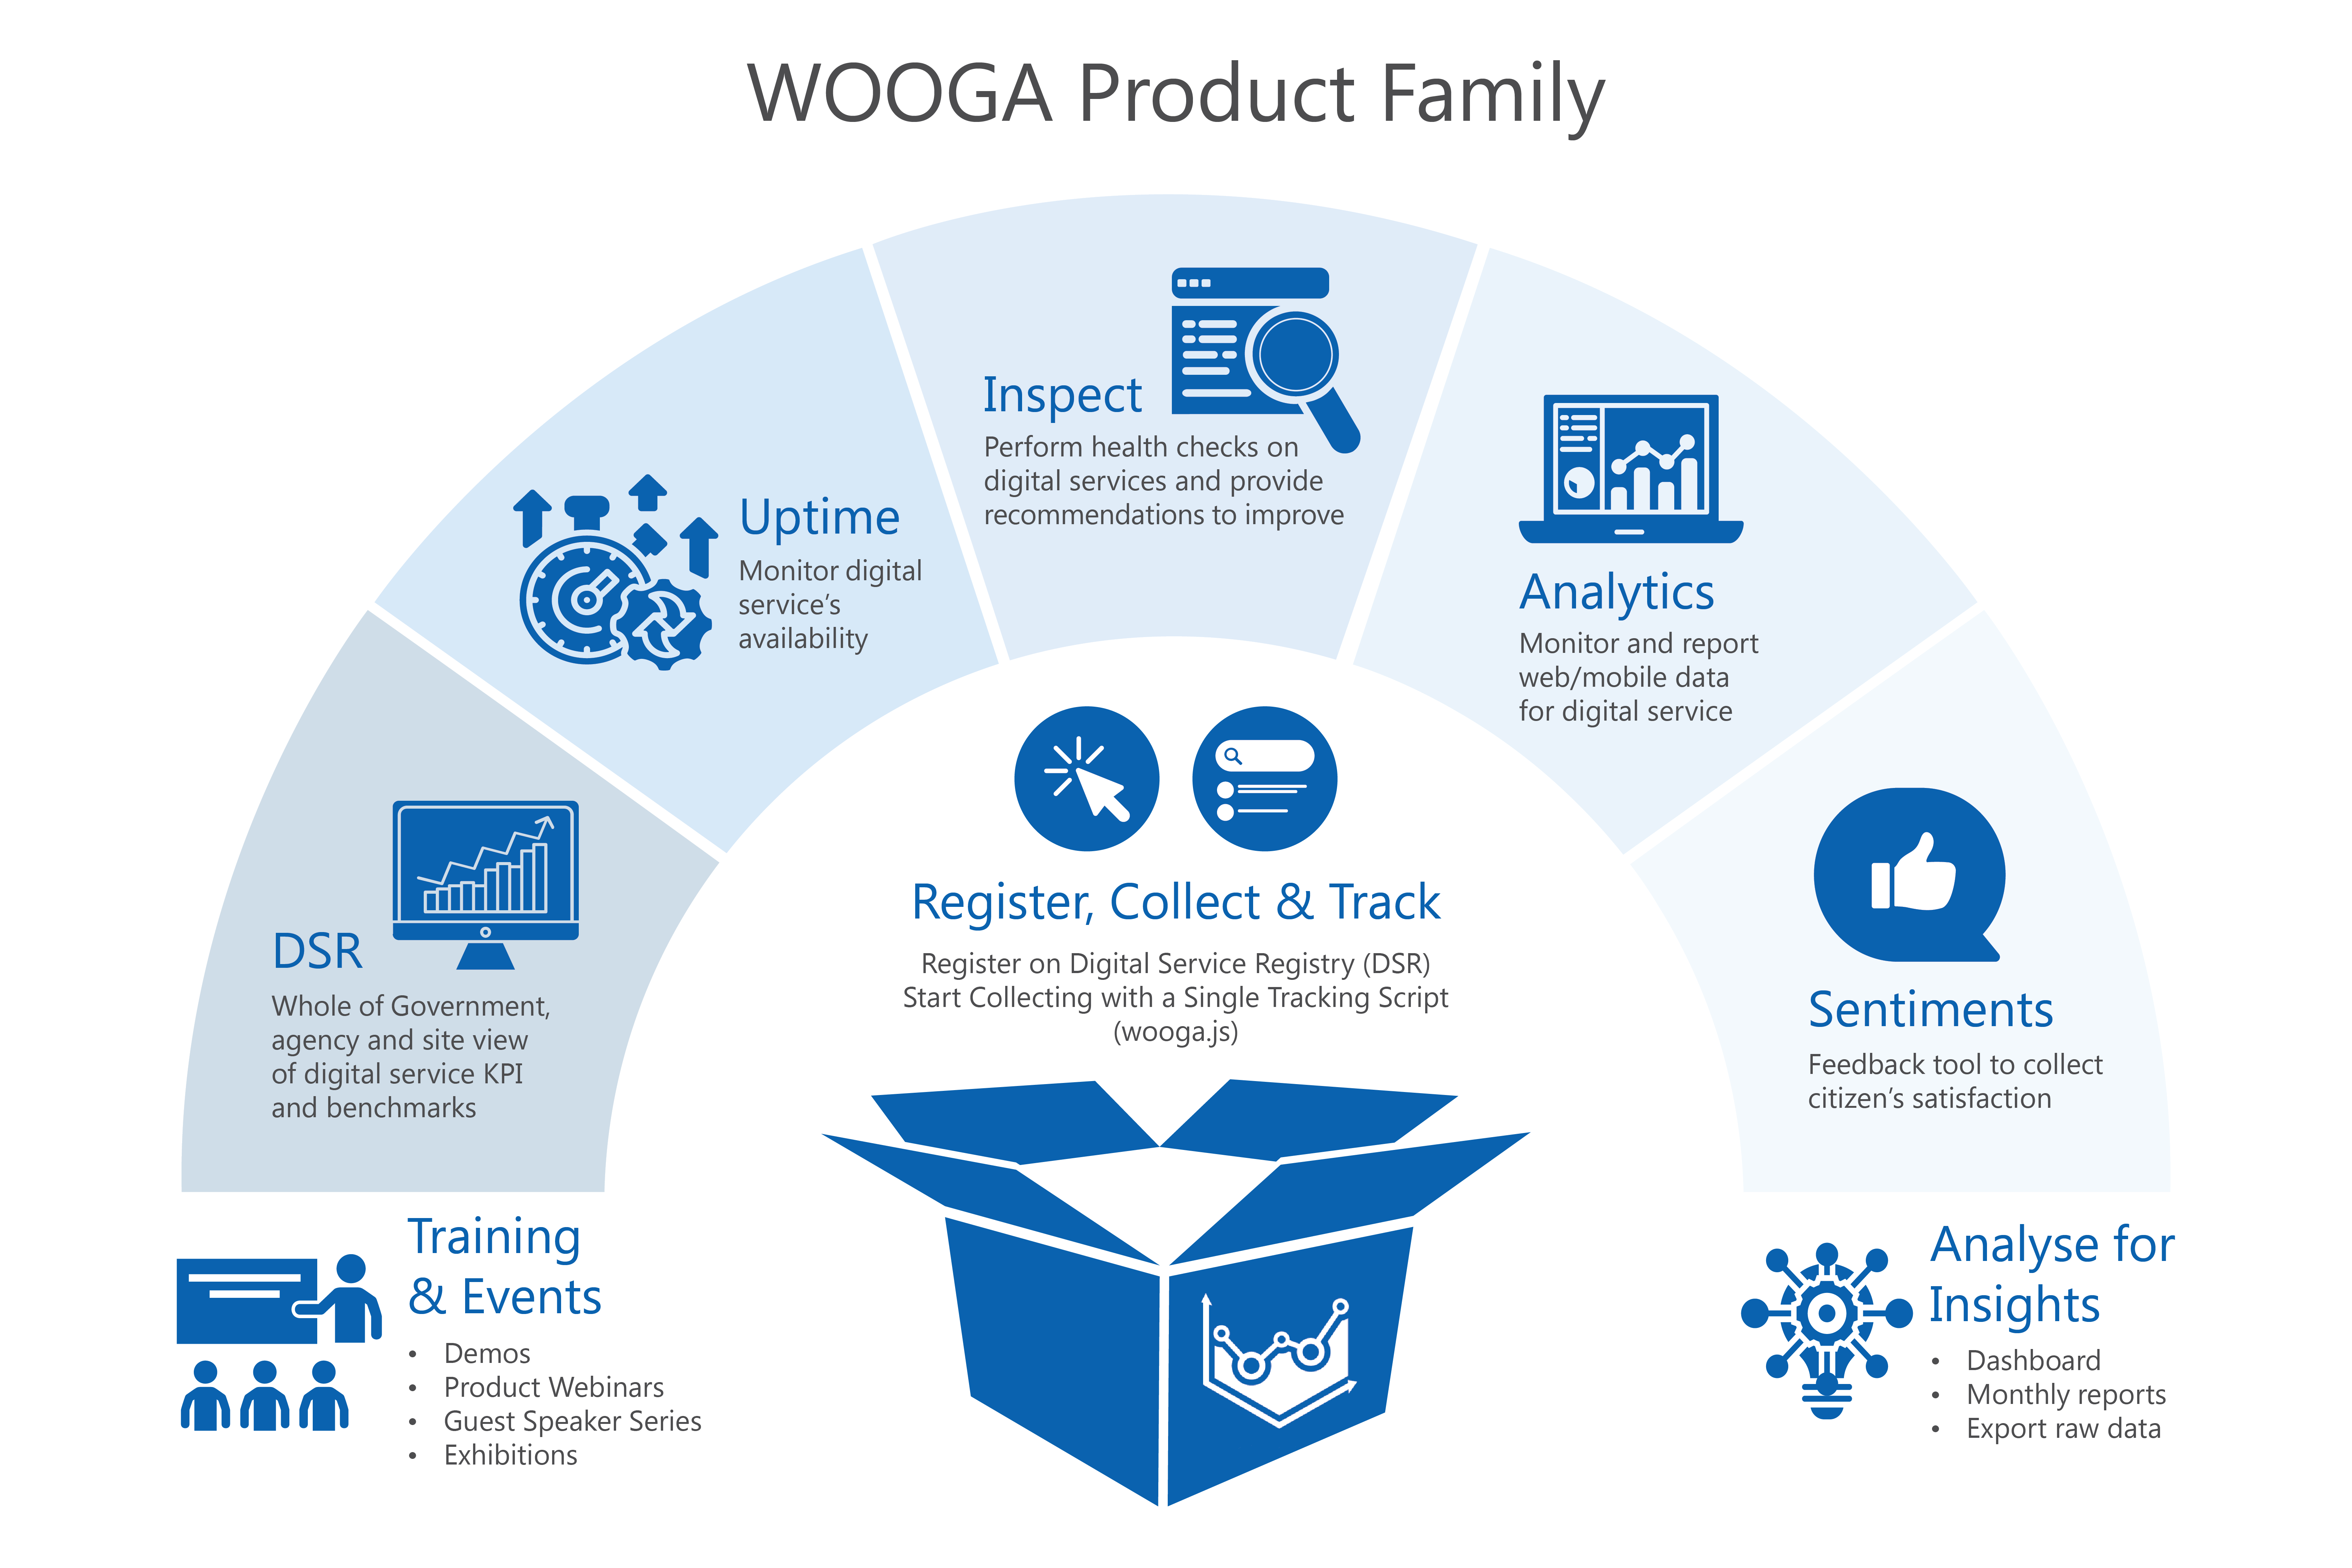 Fig 2: Overview of WOGAA’s Product Family